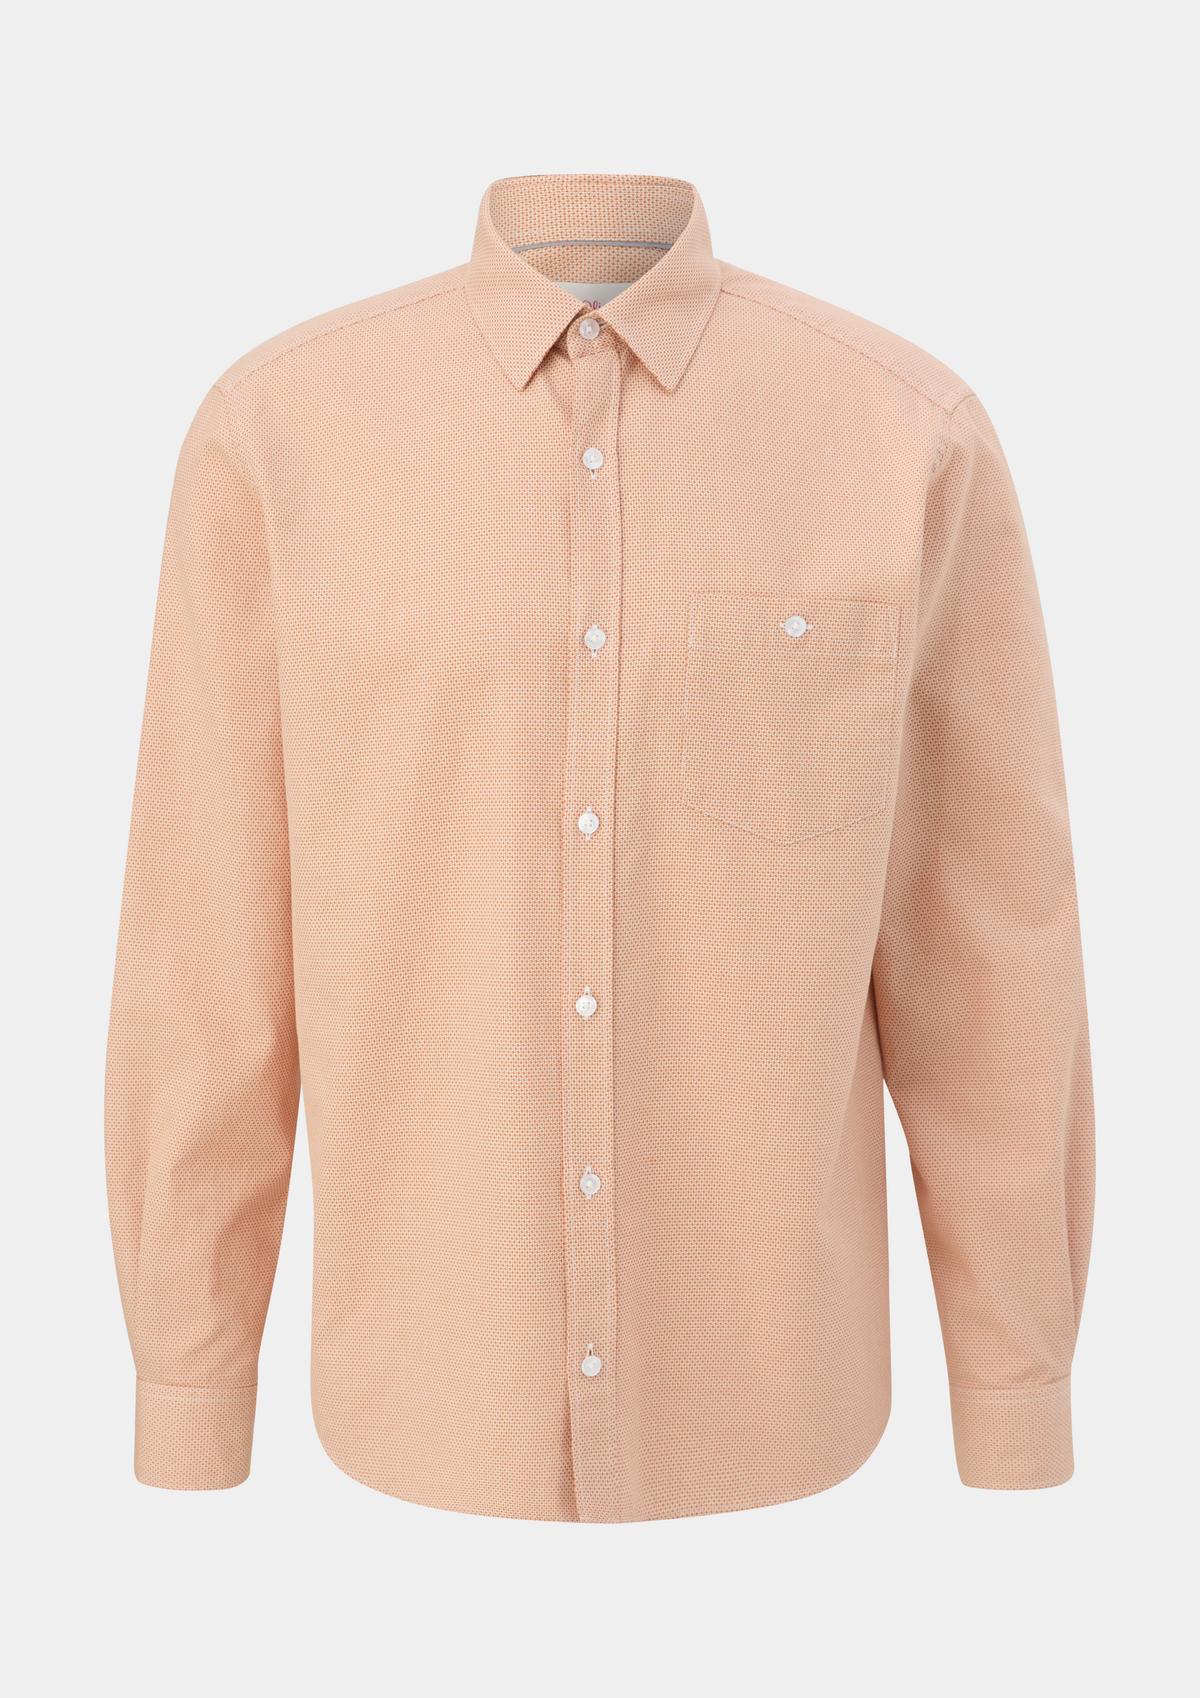 s.Oliver Regular: shirt with a woven texture